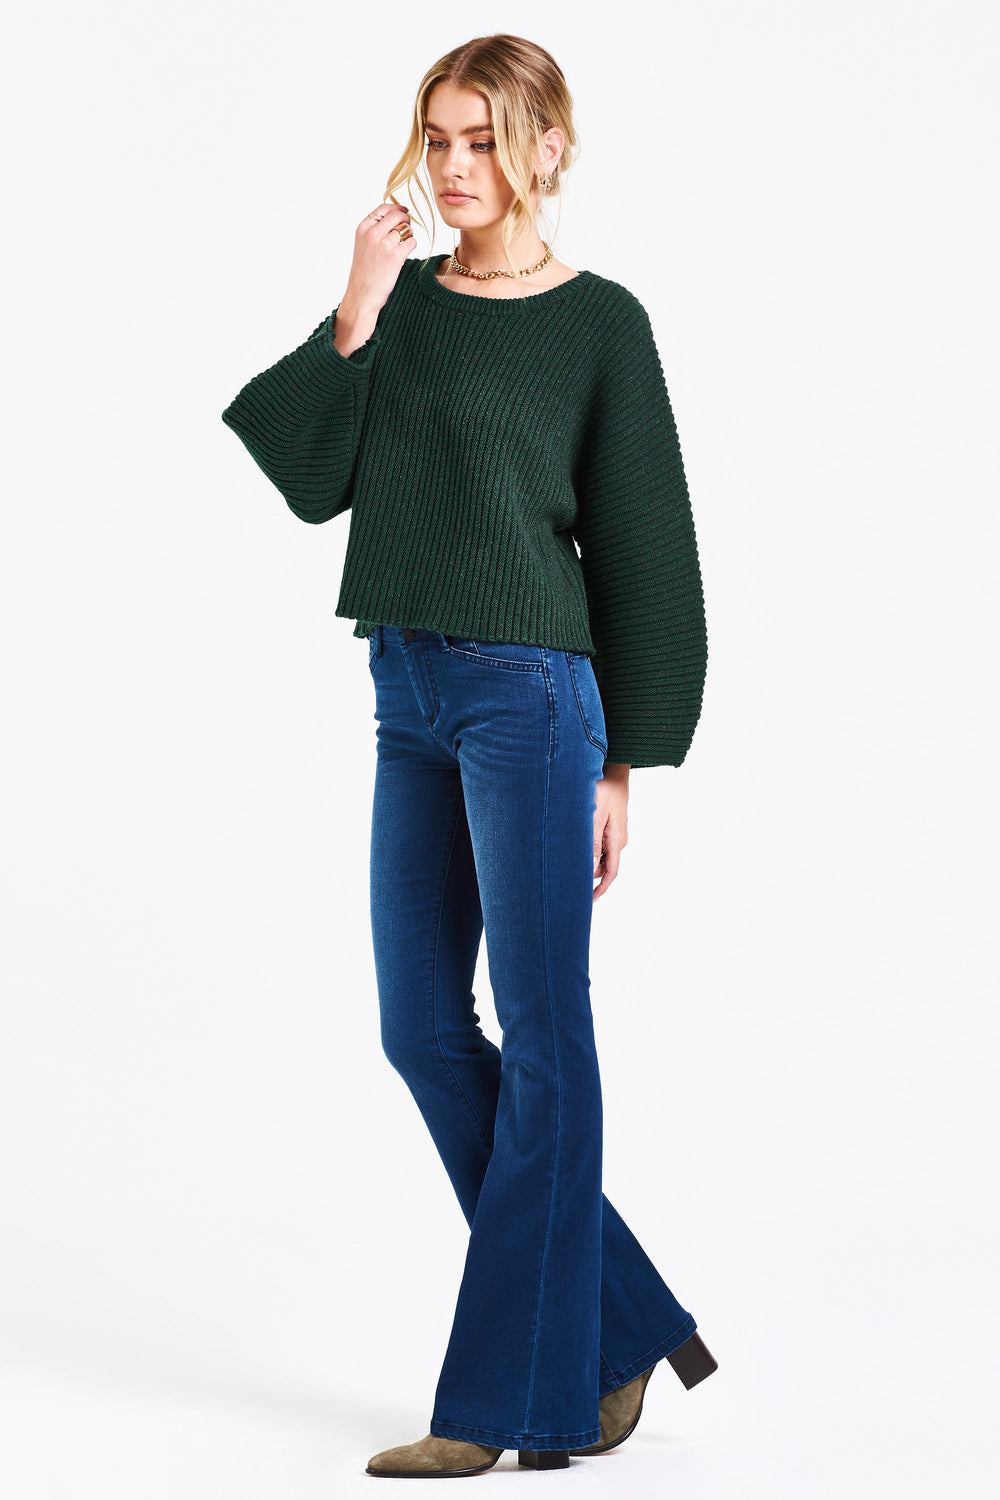 image of a female model wearing a PARKER DOLMAN SWEATER CHRISTMAS GREEN SWEATERS